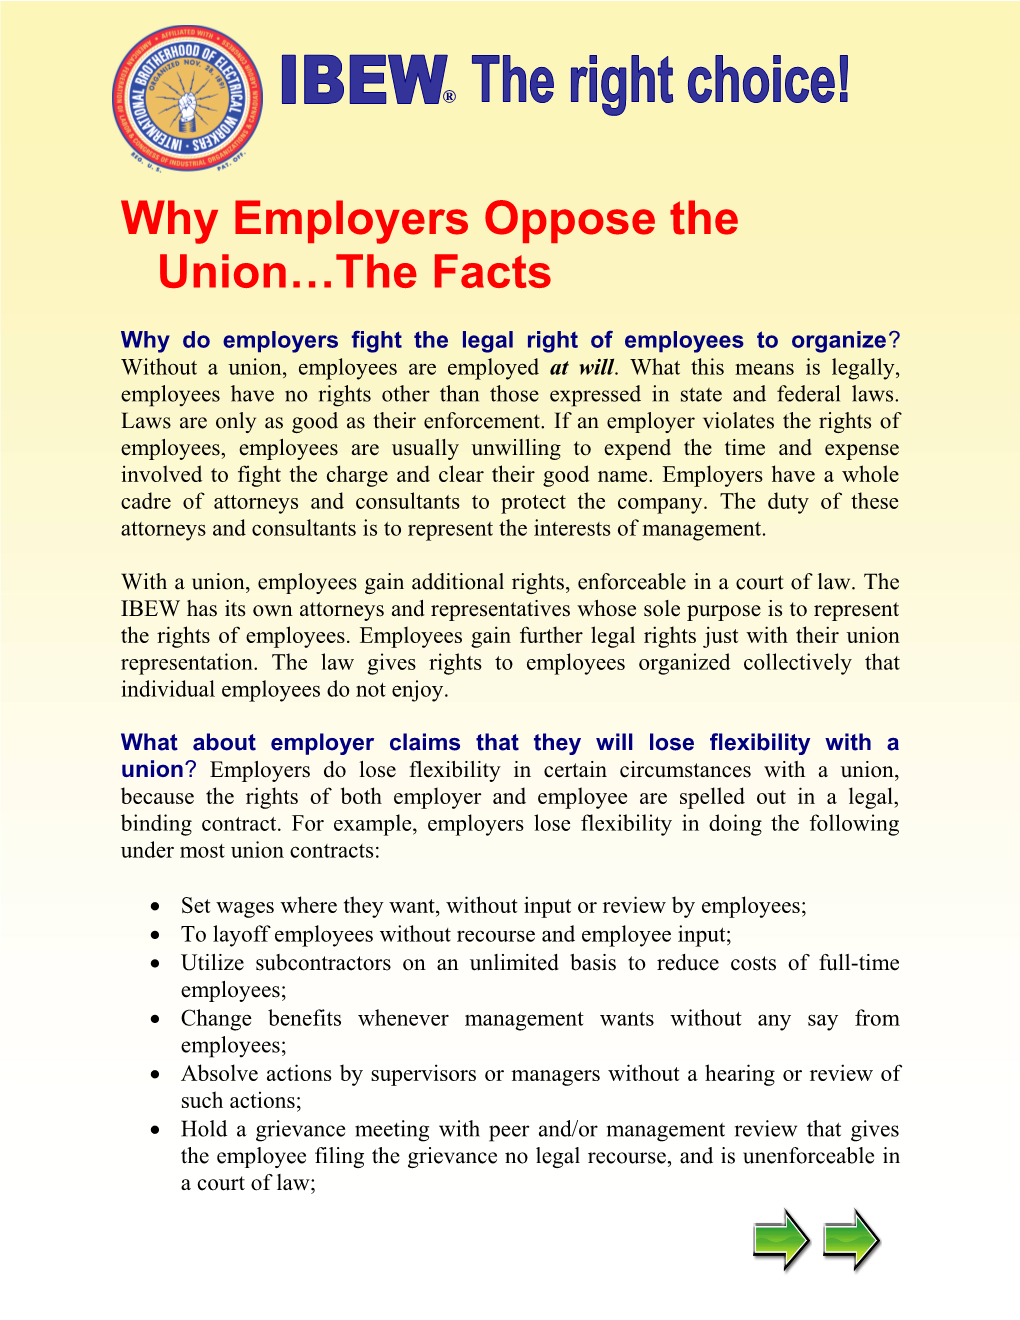 Why Employers Oppose the Union the Facts